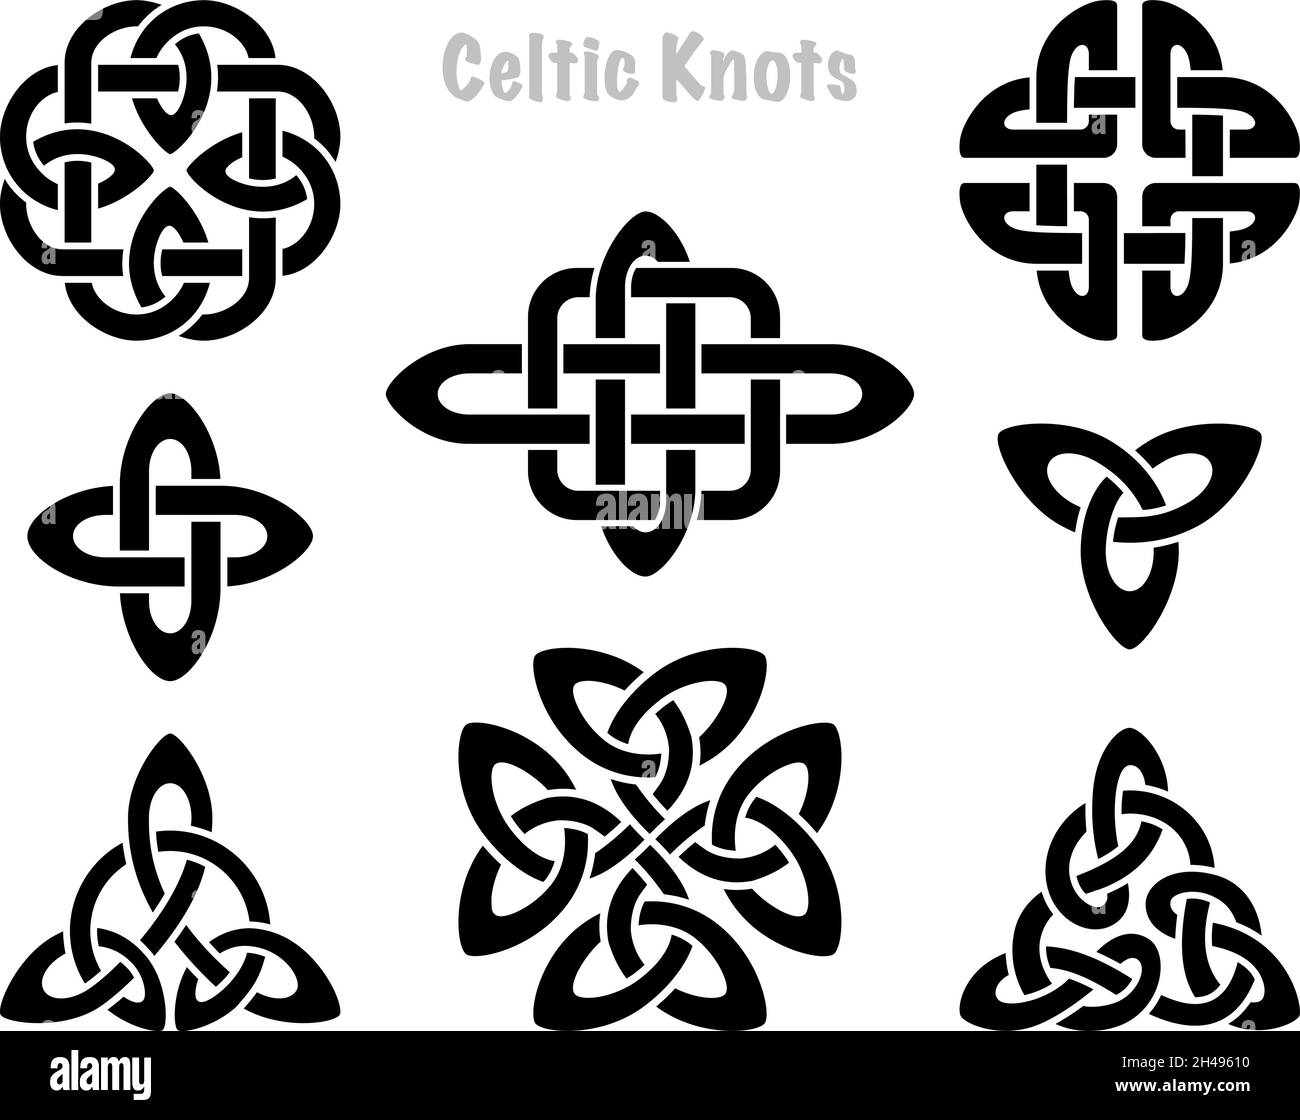 Celtic knots silhouettes. Irish knot symbols, celt three trintiy endless knotted shape vector icon, infinite spirit unity symbol, paganscircle tribal symbolism graphics isolated on white Stock Vector